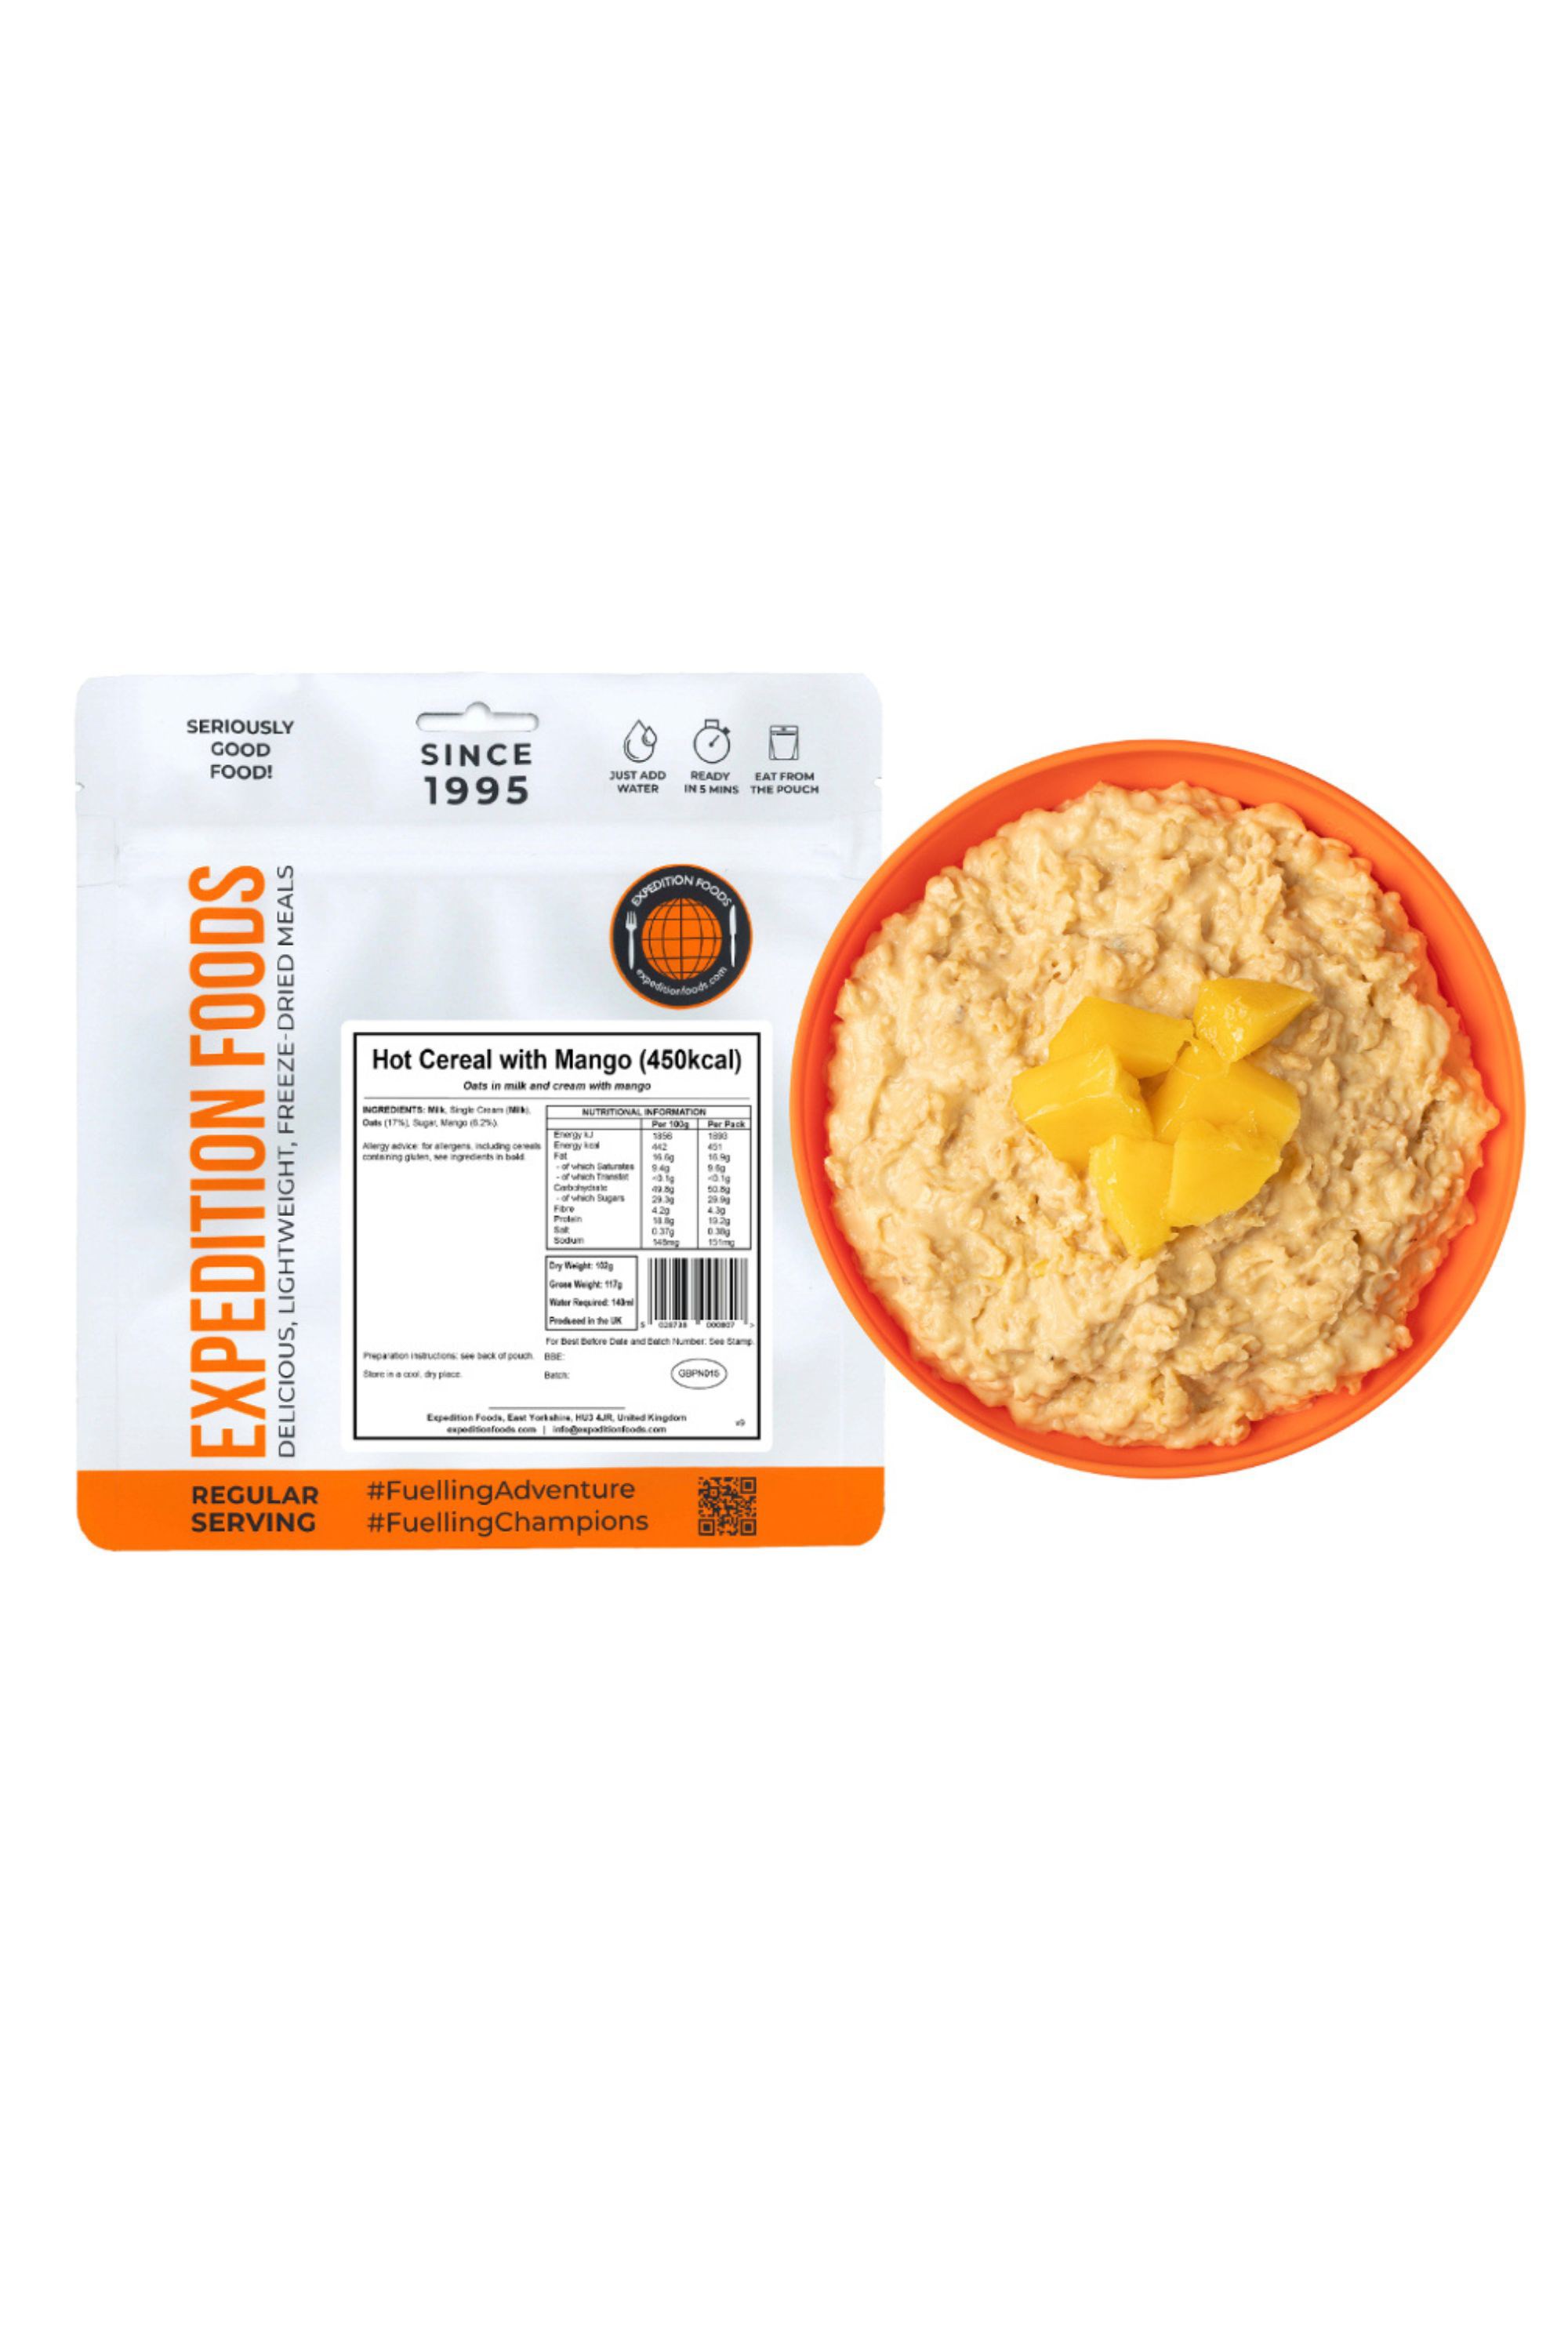 Hot Cereal With Mango Camping Food (450kcal) -